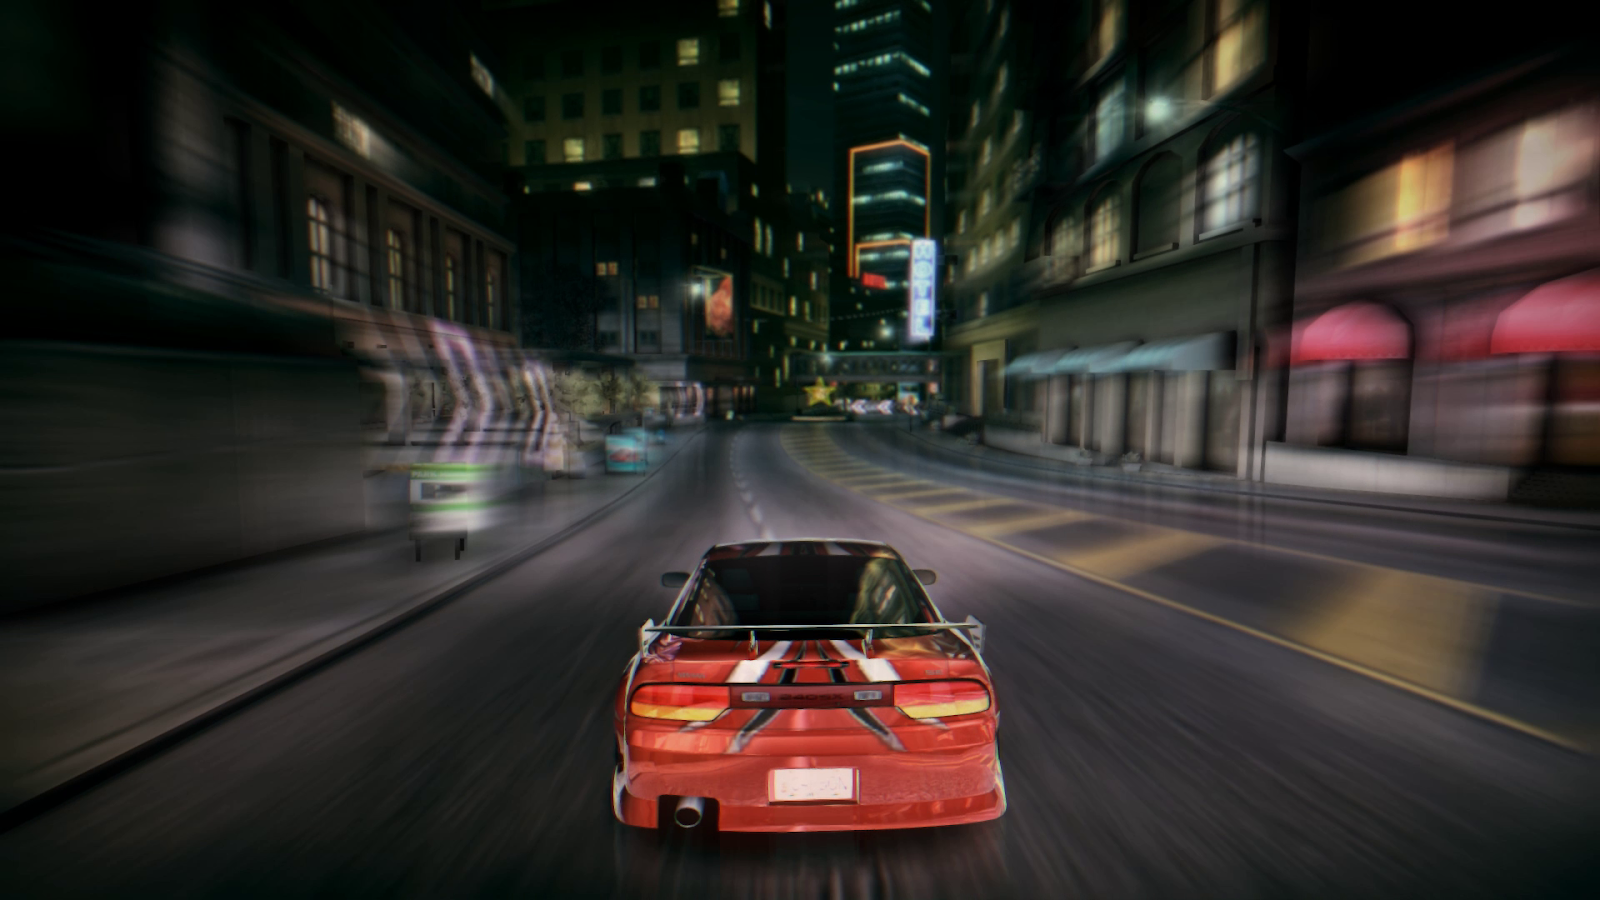 Nfsc Nfs Carbon Ultra Graphics Mod 17 Like Nfs 15 Need For Speed Carbon Graphics Mod Download